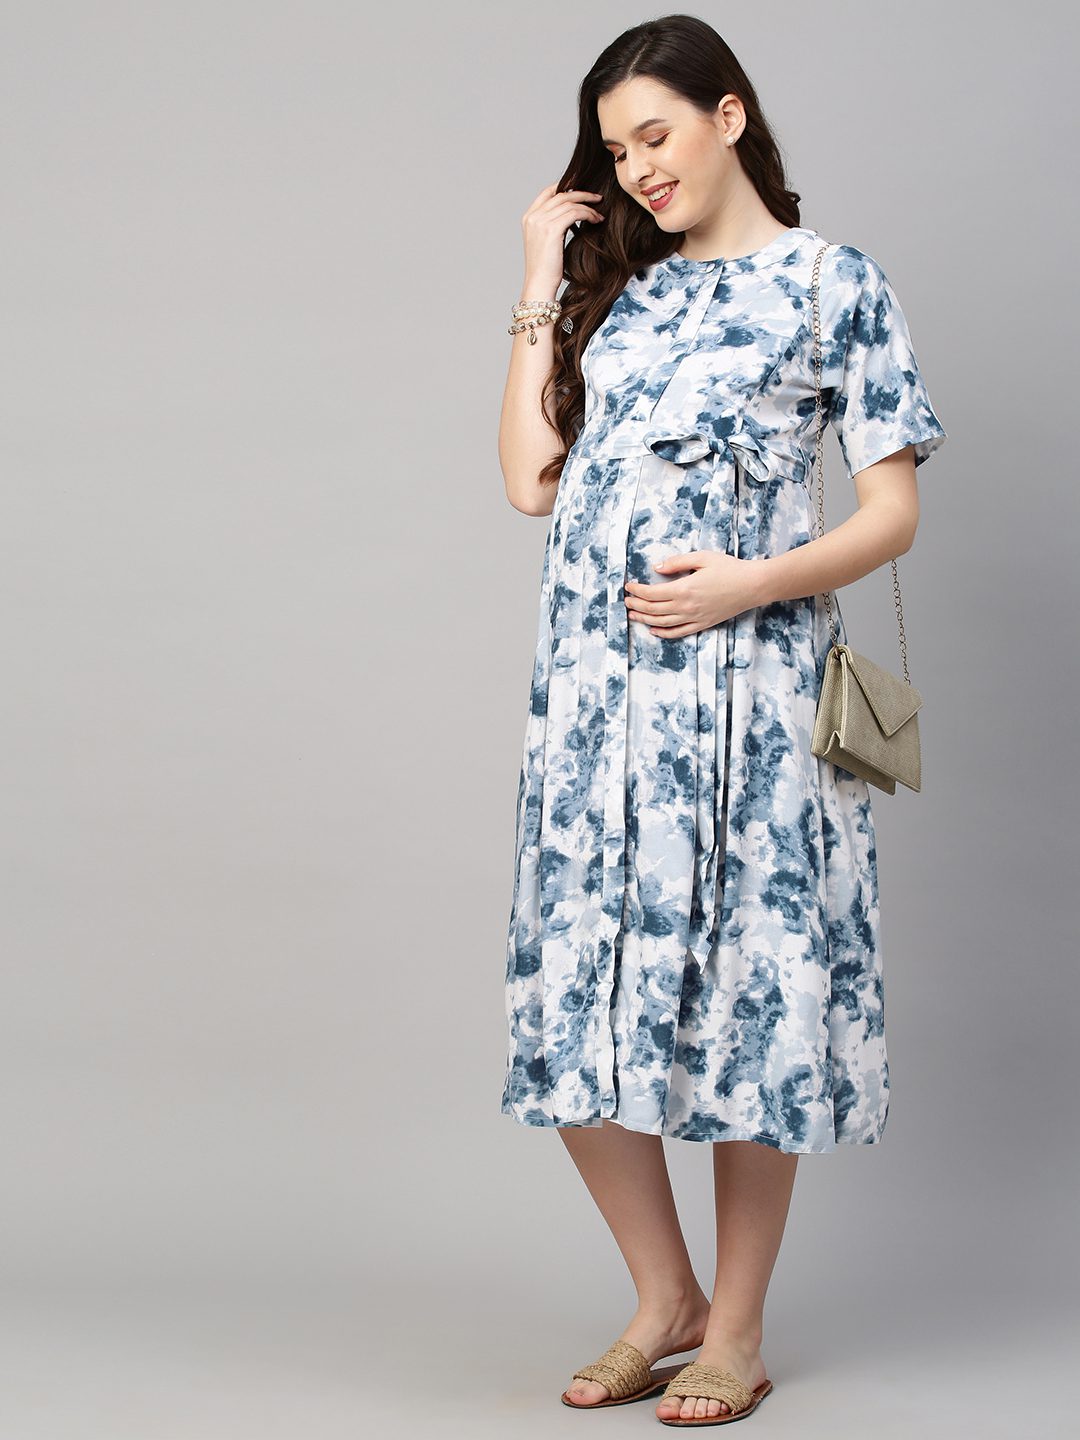 Stylish Maternity Maxi Gown For Eid Mubarak Photo Shoots And Ramadan  Perfect For Muslim Moms Q0713 From Sihuai04, $7.26 | DHgate.Com